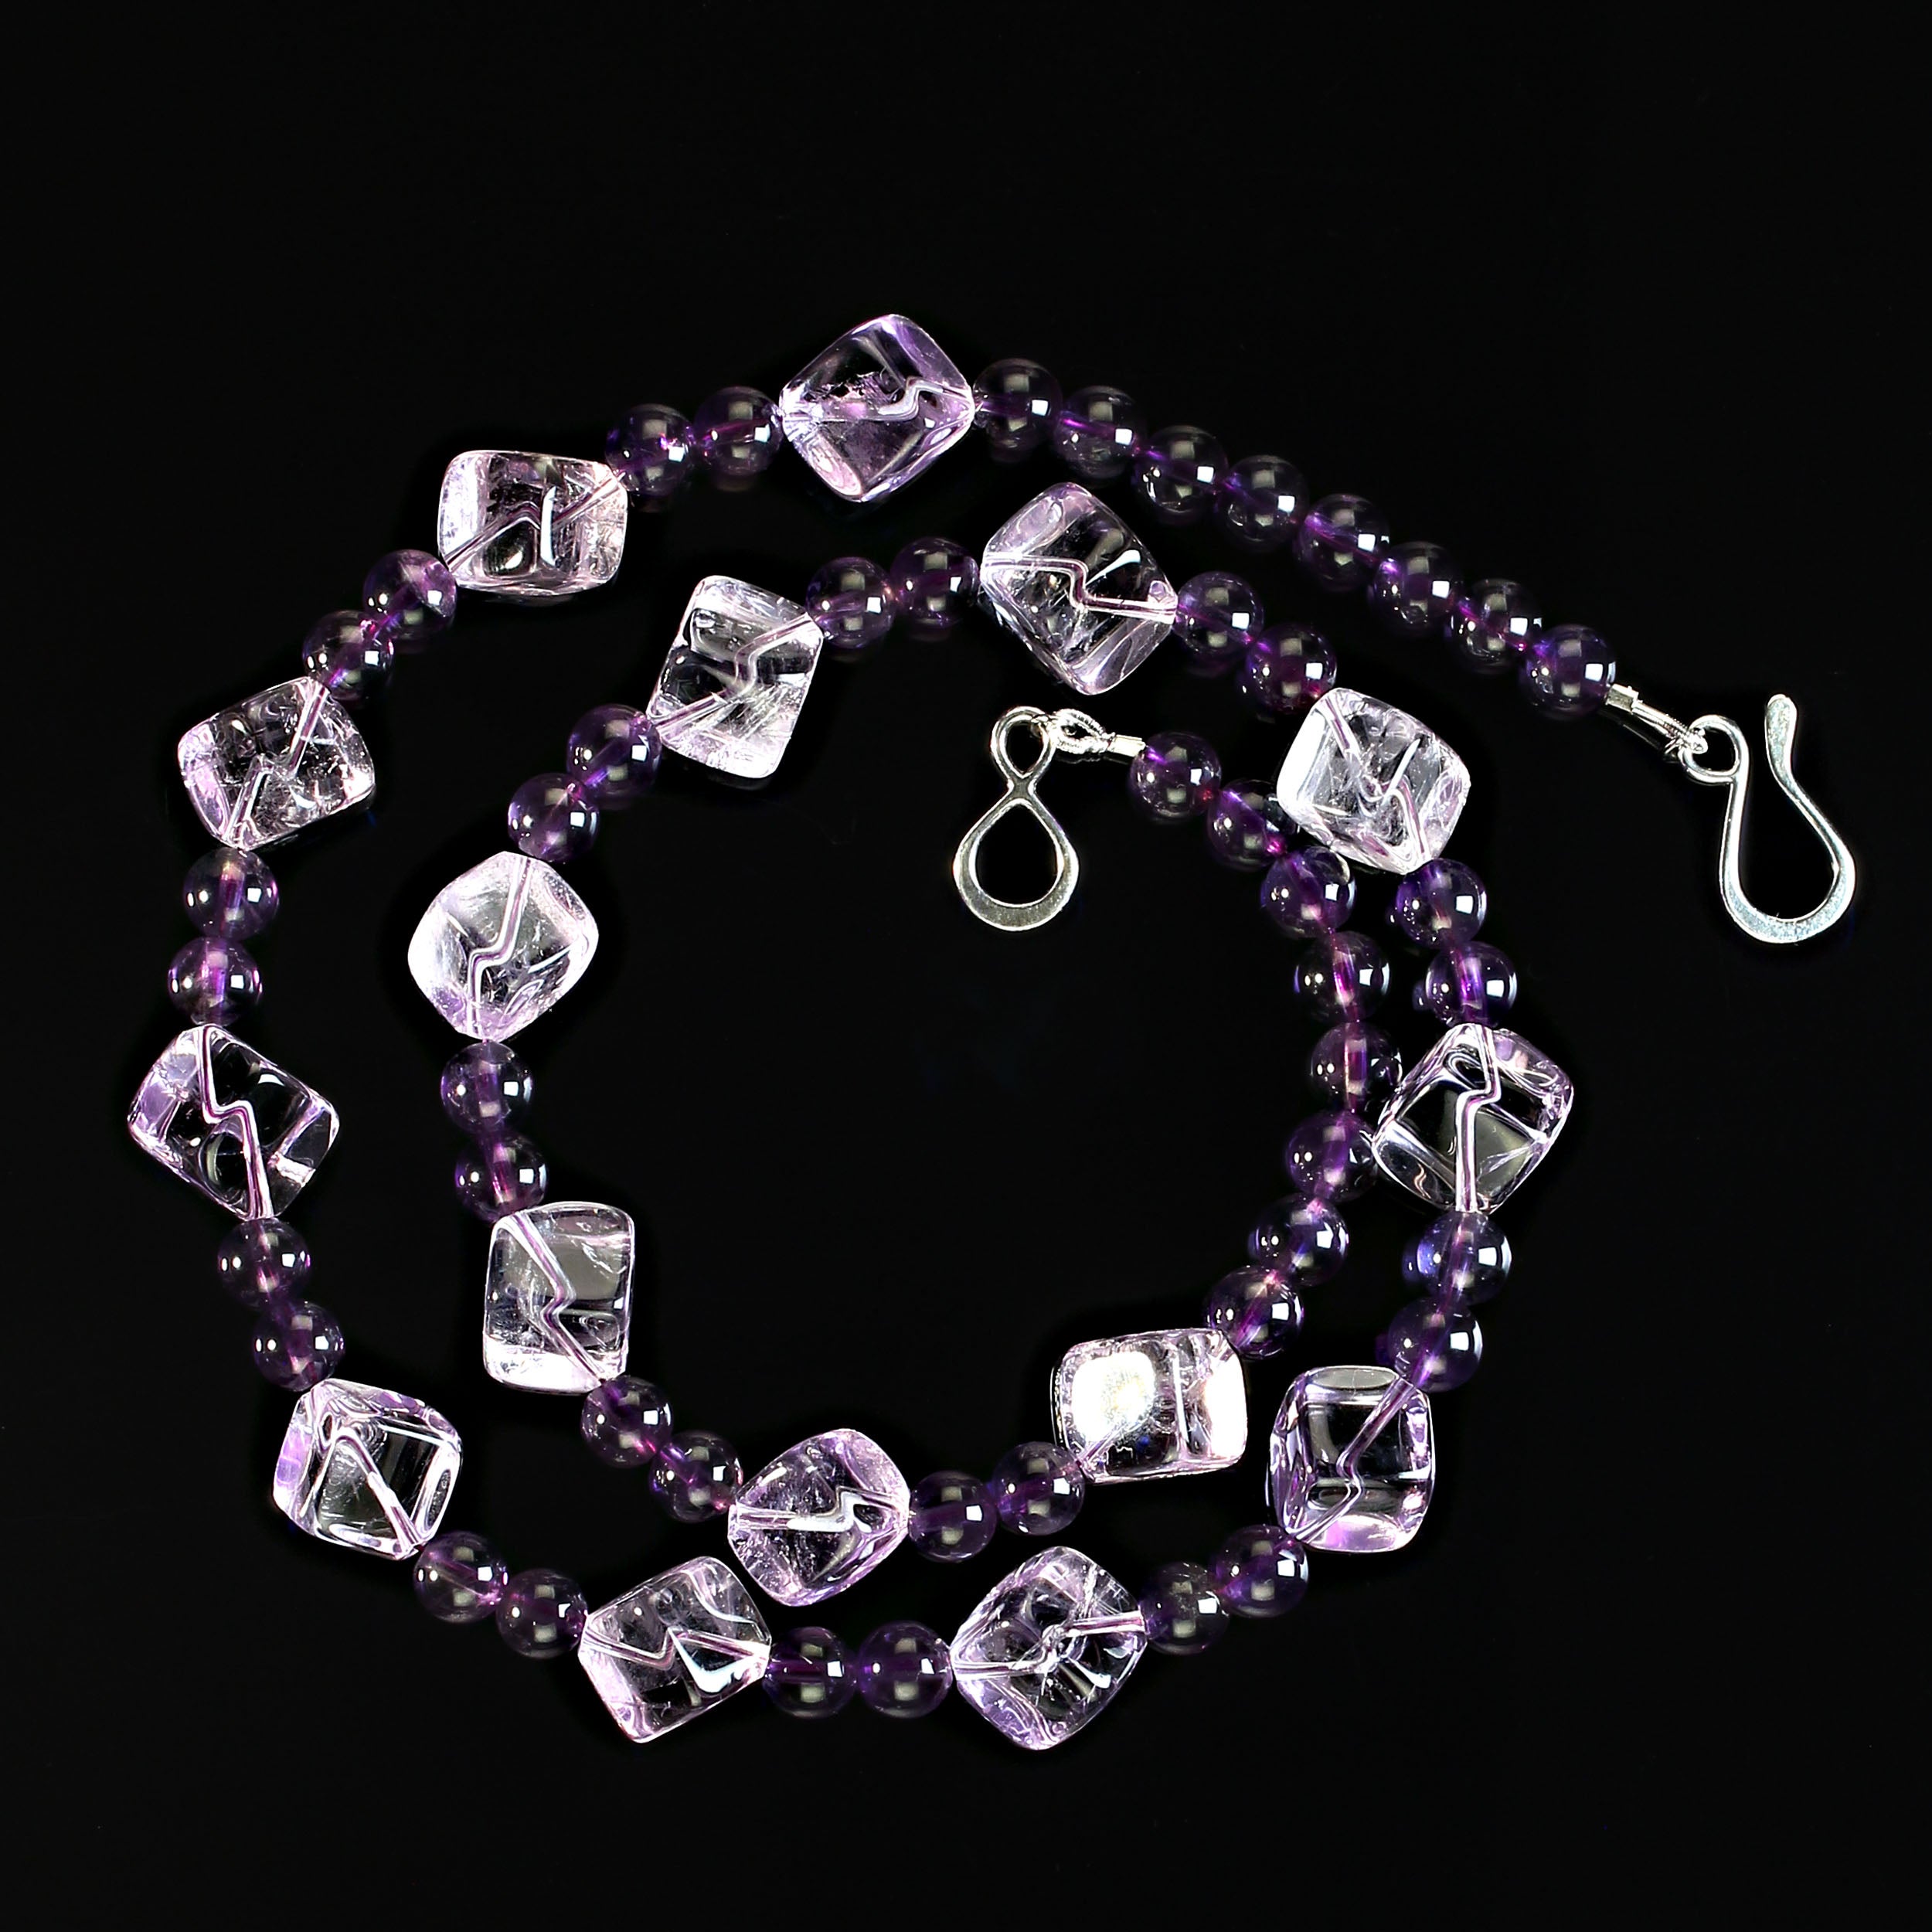 AJD Rose of France Cubes and 6MM Amethyst in a 21 Inch Necklace For Sale